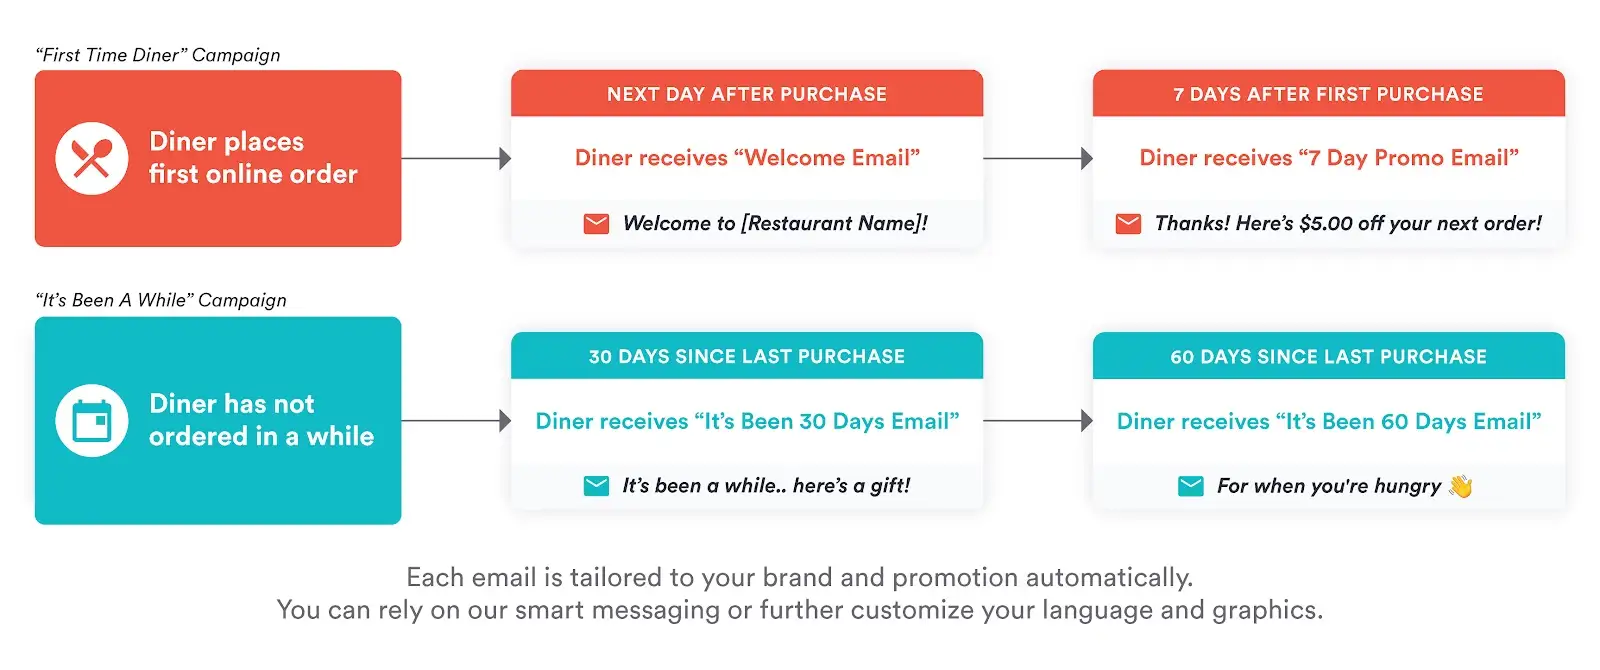 Automated Campaigns customer journey graphic